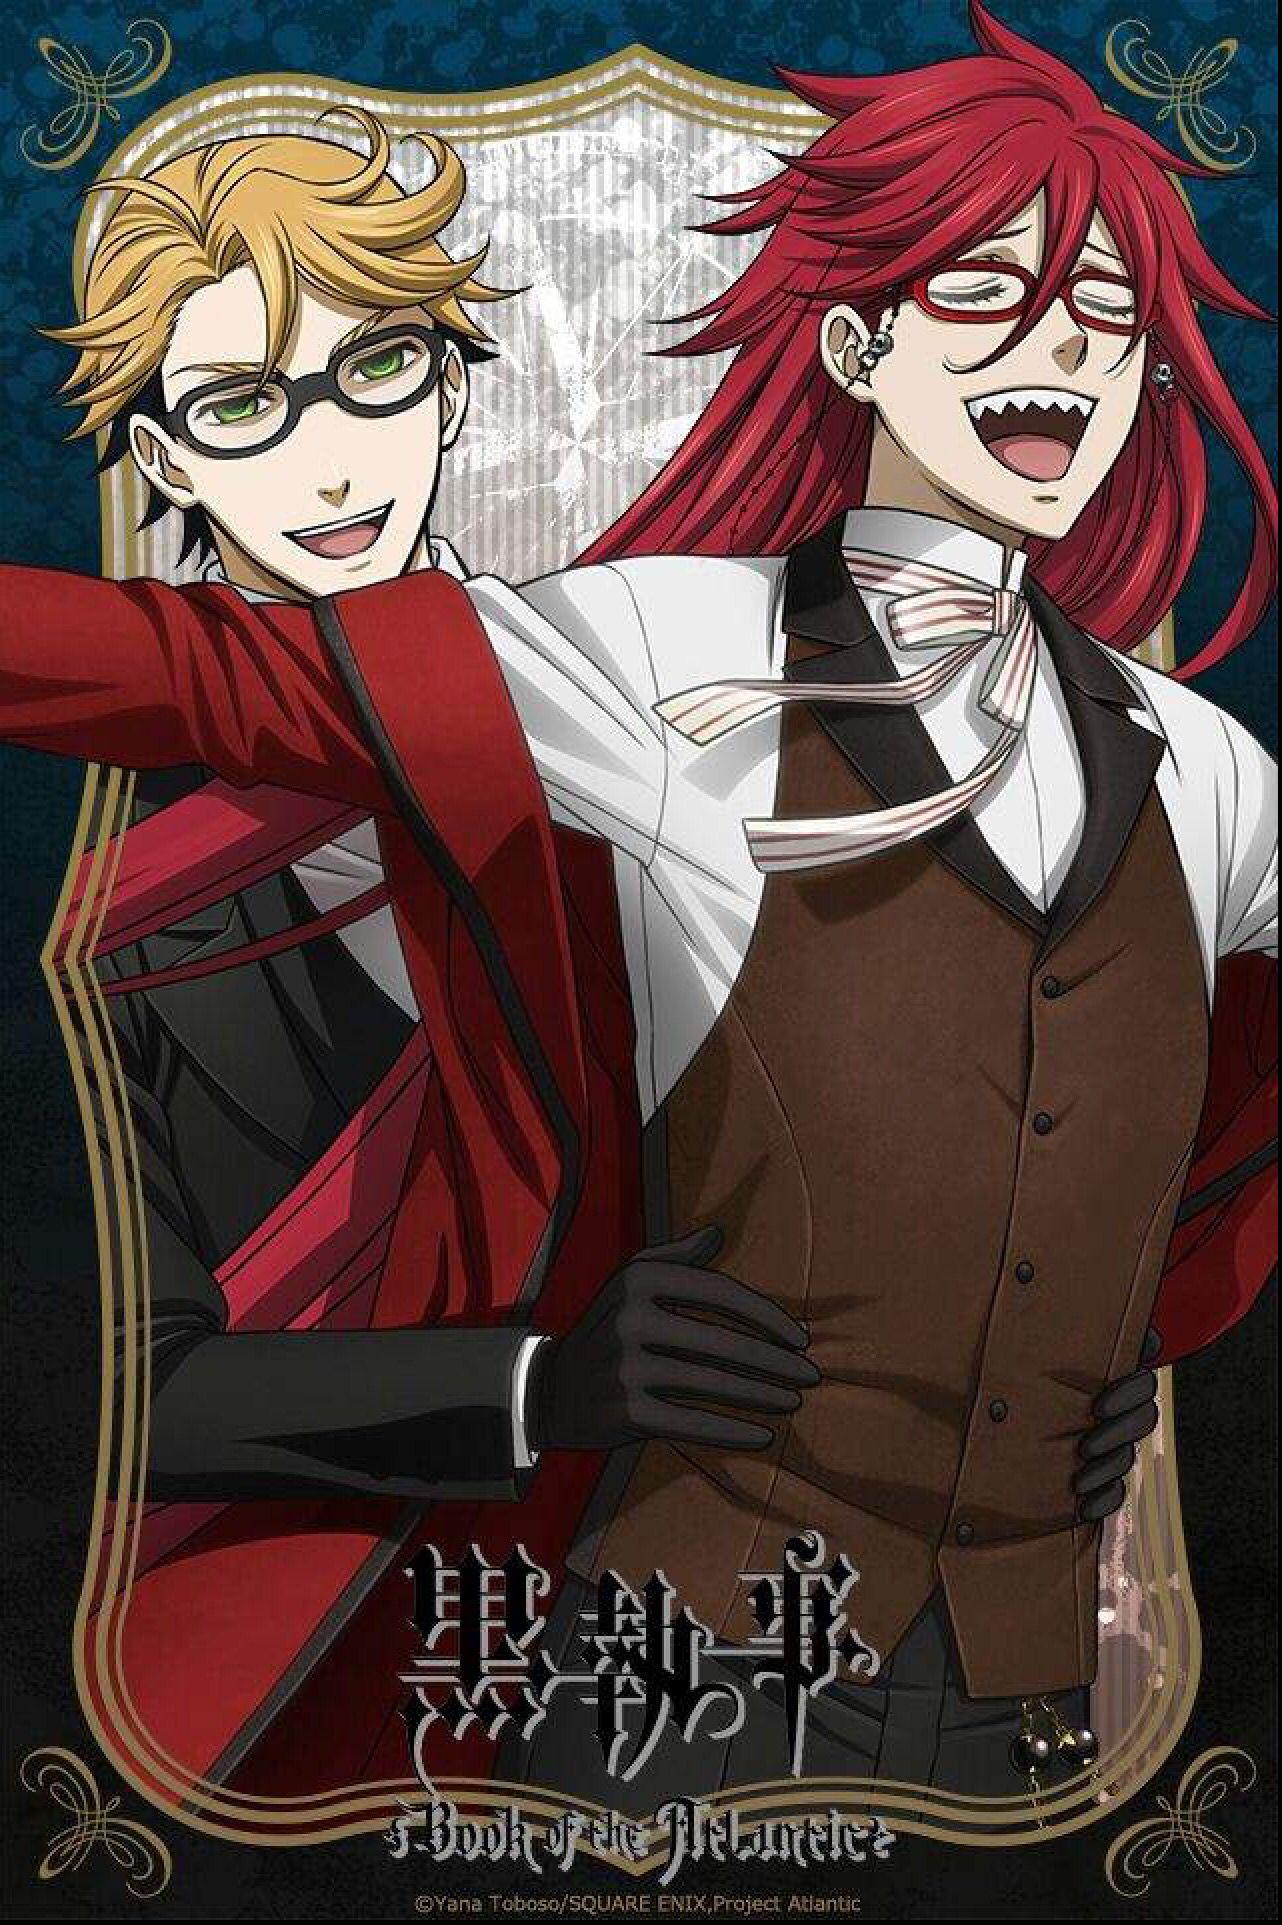 Book of Atlantic: Ronald and Grell. Black Butler